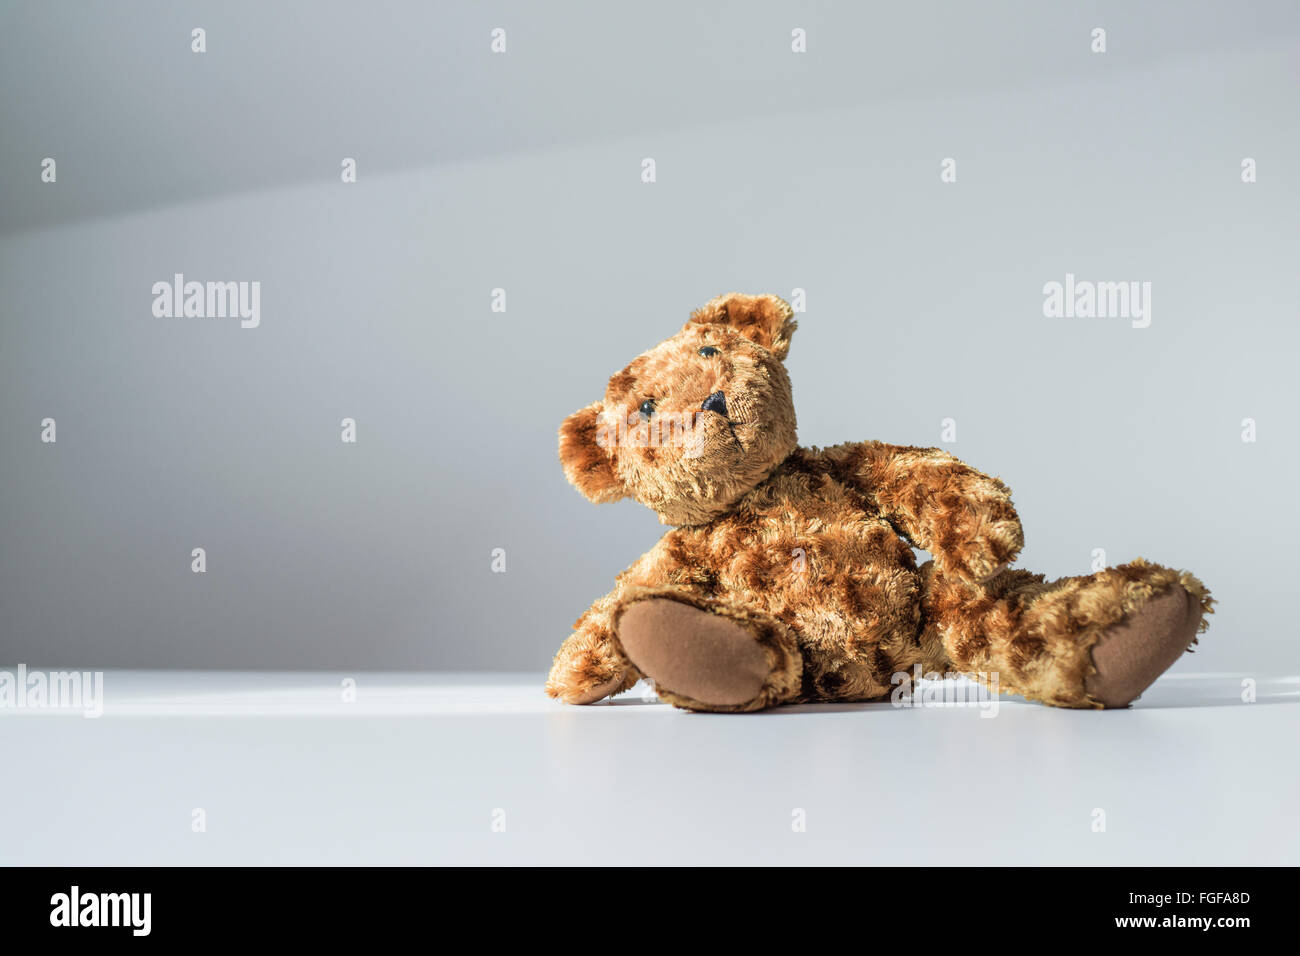 Brown teddy bear sitting on the floor leaning to one side Stock Photo